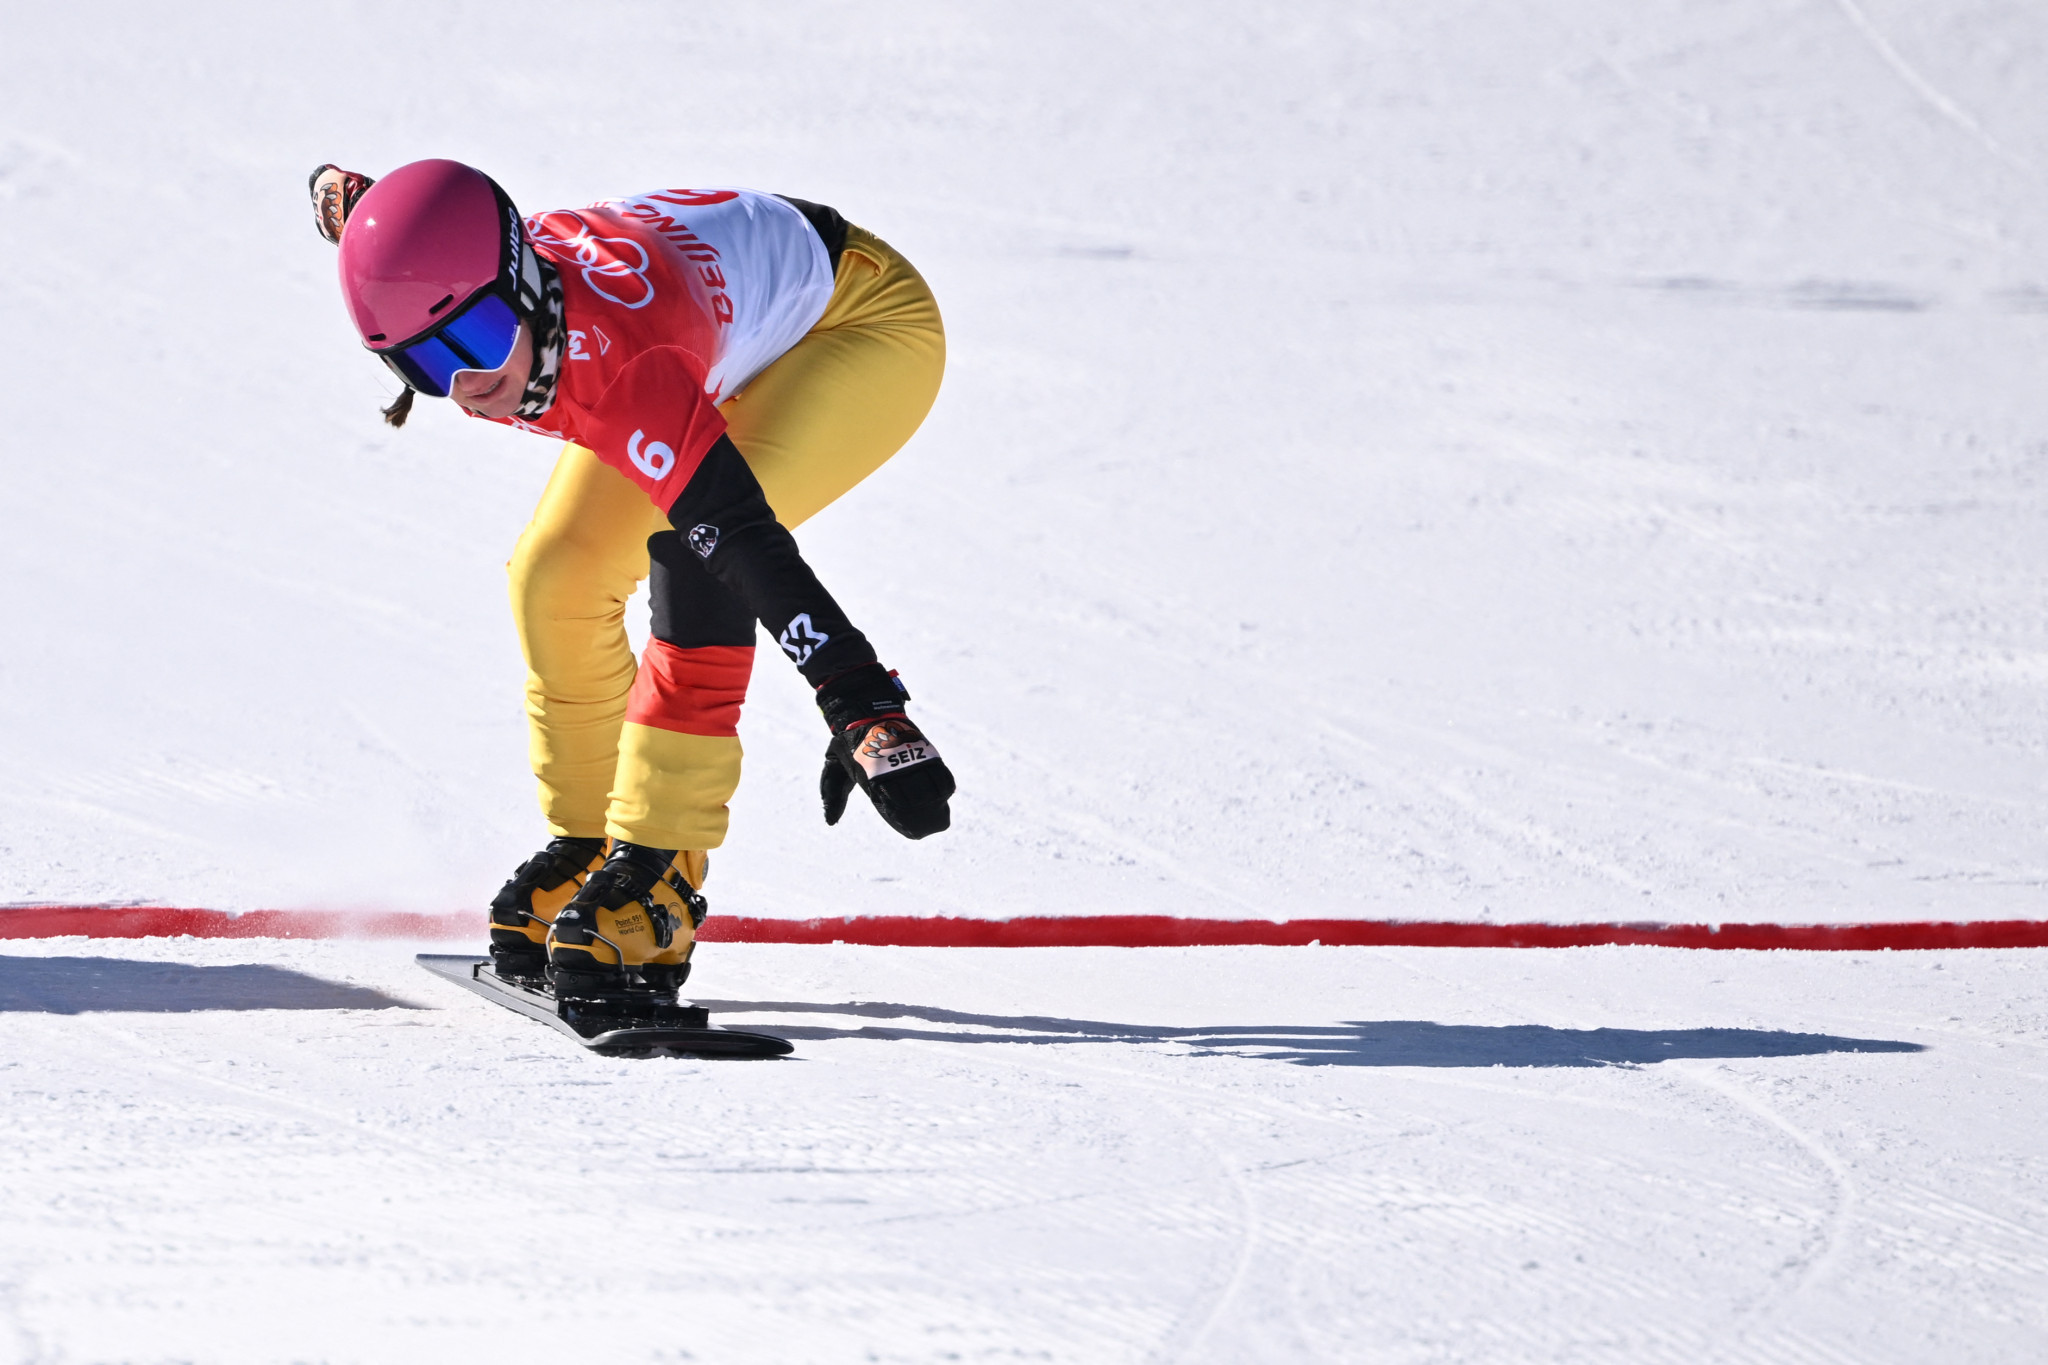 Hofmeister and Baumeister win team event at Alpine Snowboard World Cup in Berchtesgaden